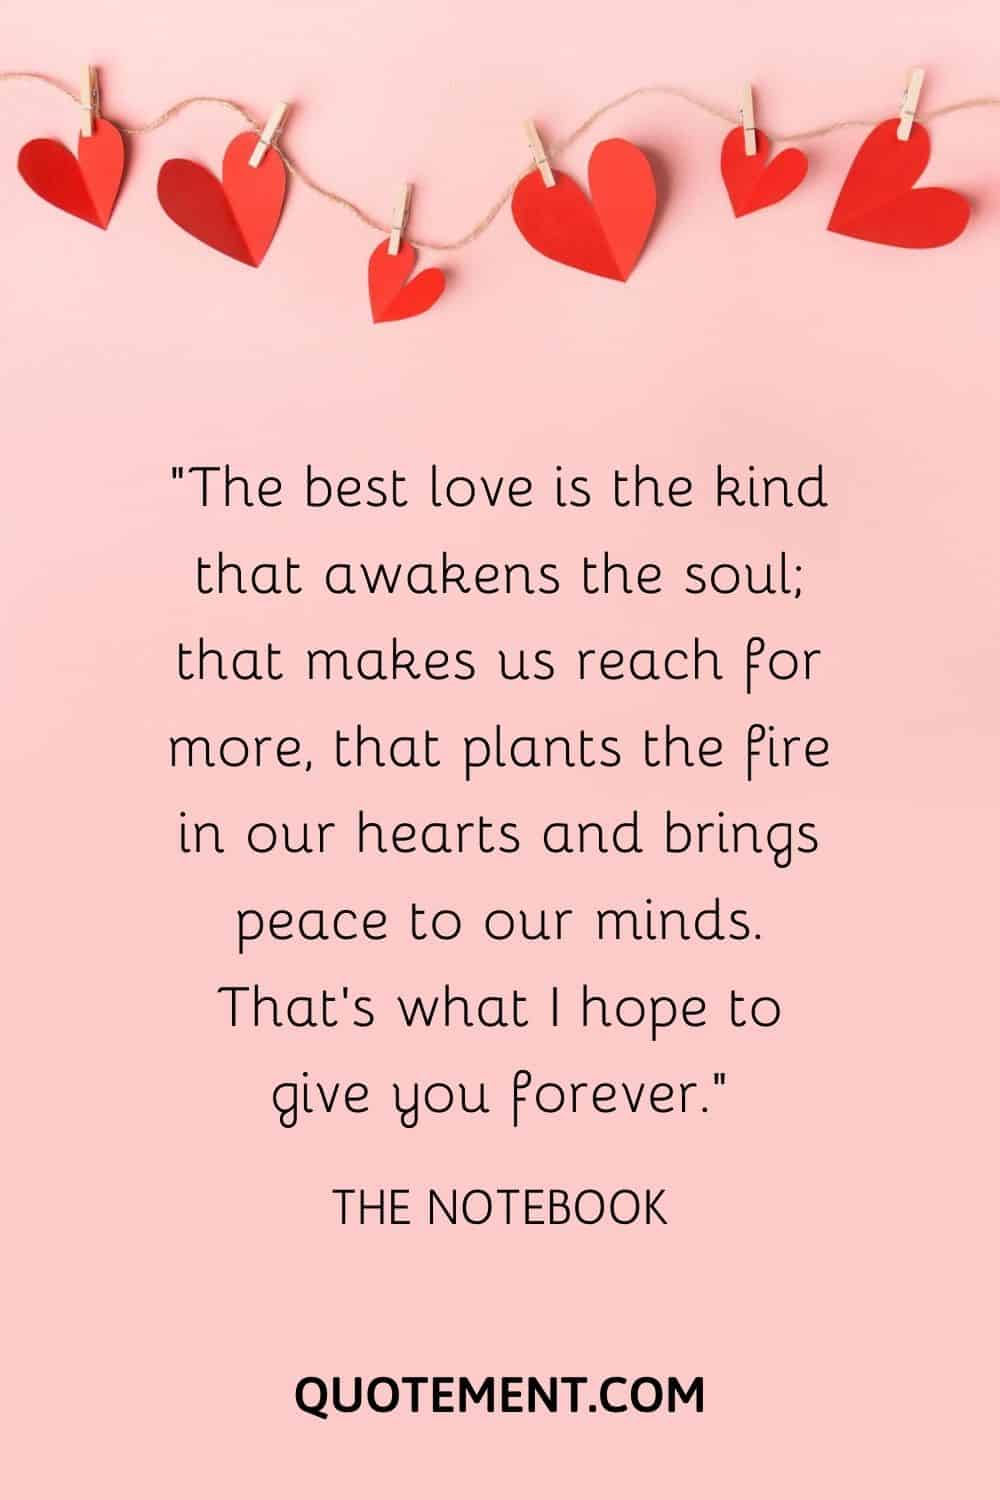 The best love is the kind that awakens the soul